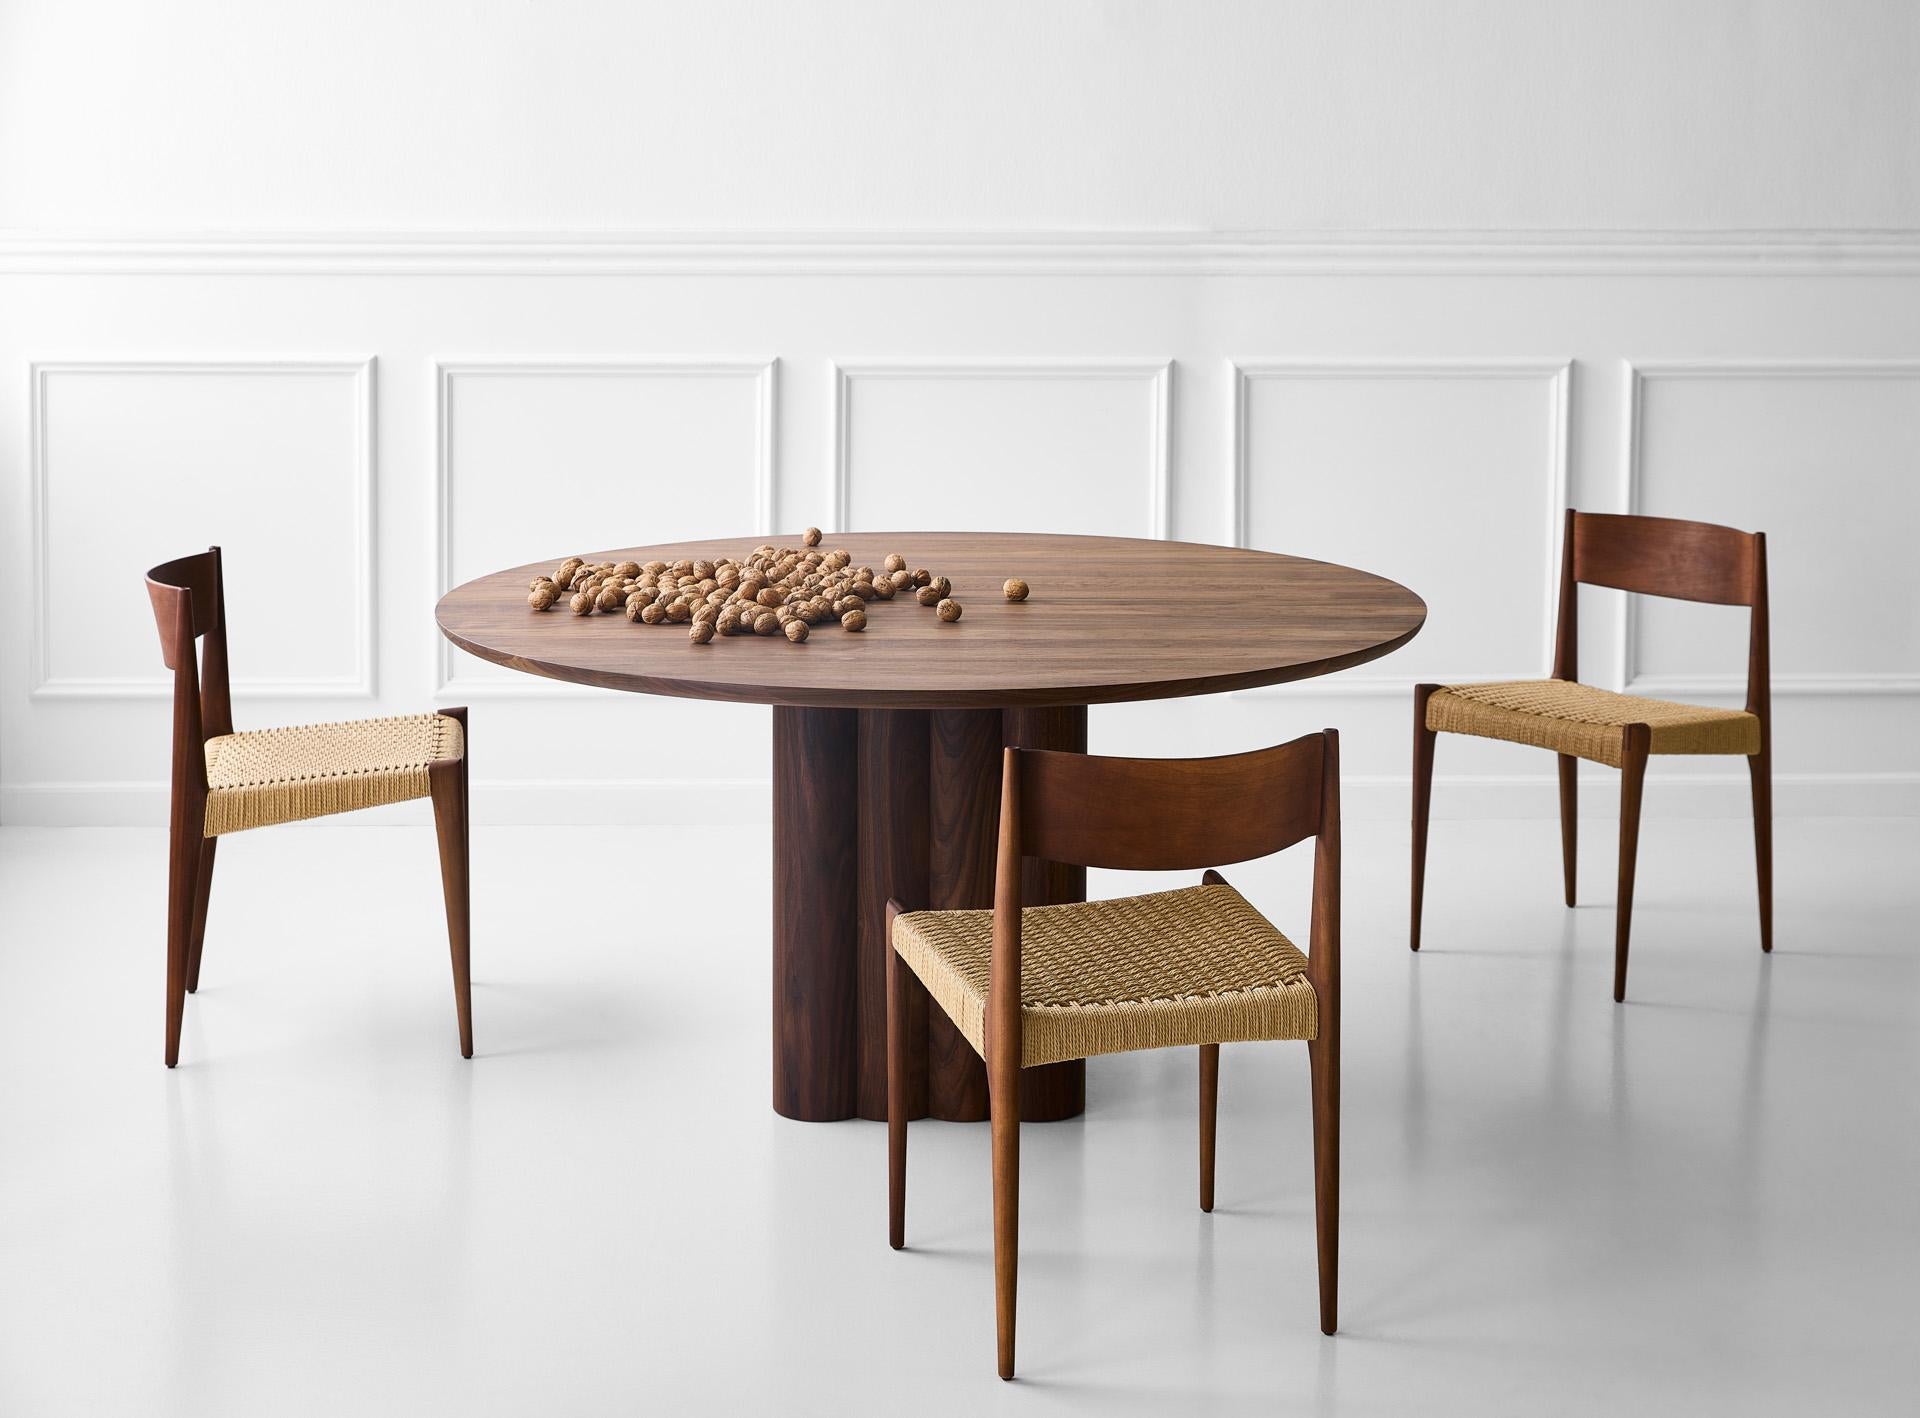 PLUSH dining table, round, 160 cm.
Solid wood table top and legs. Handmade in Denmark. 
Signed by Jacob Plejdrup for DK3

Table's height: 72 or 74 cm

Sold model: 
Smoked Oak
Cube base: 46x46 cm
Table top Thickness: 30 mm
(Extraction for max. 2